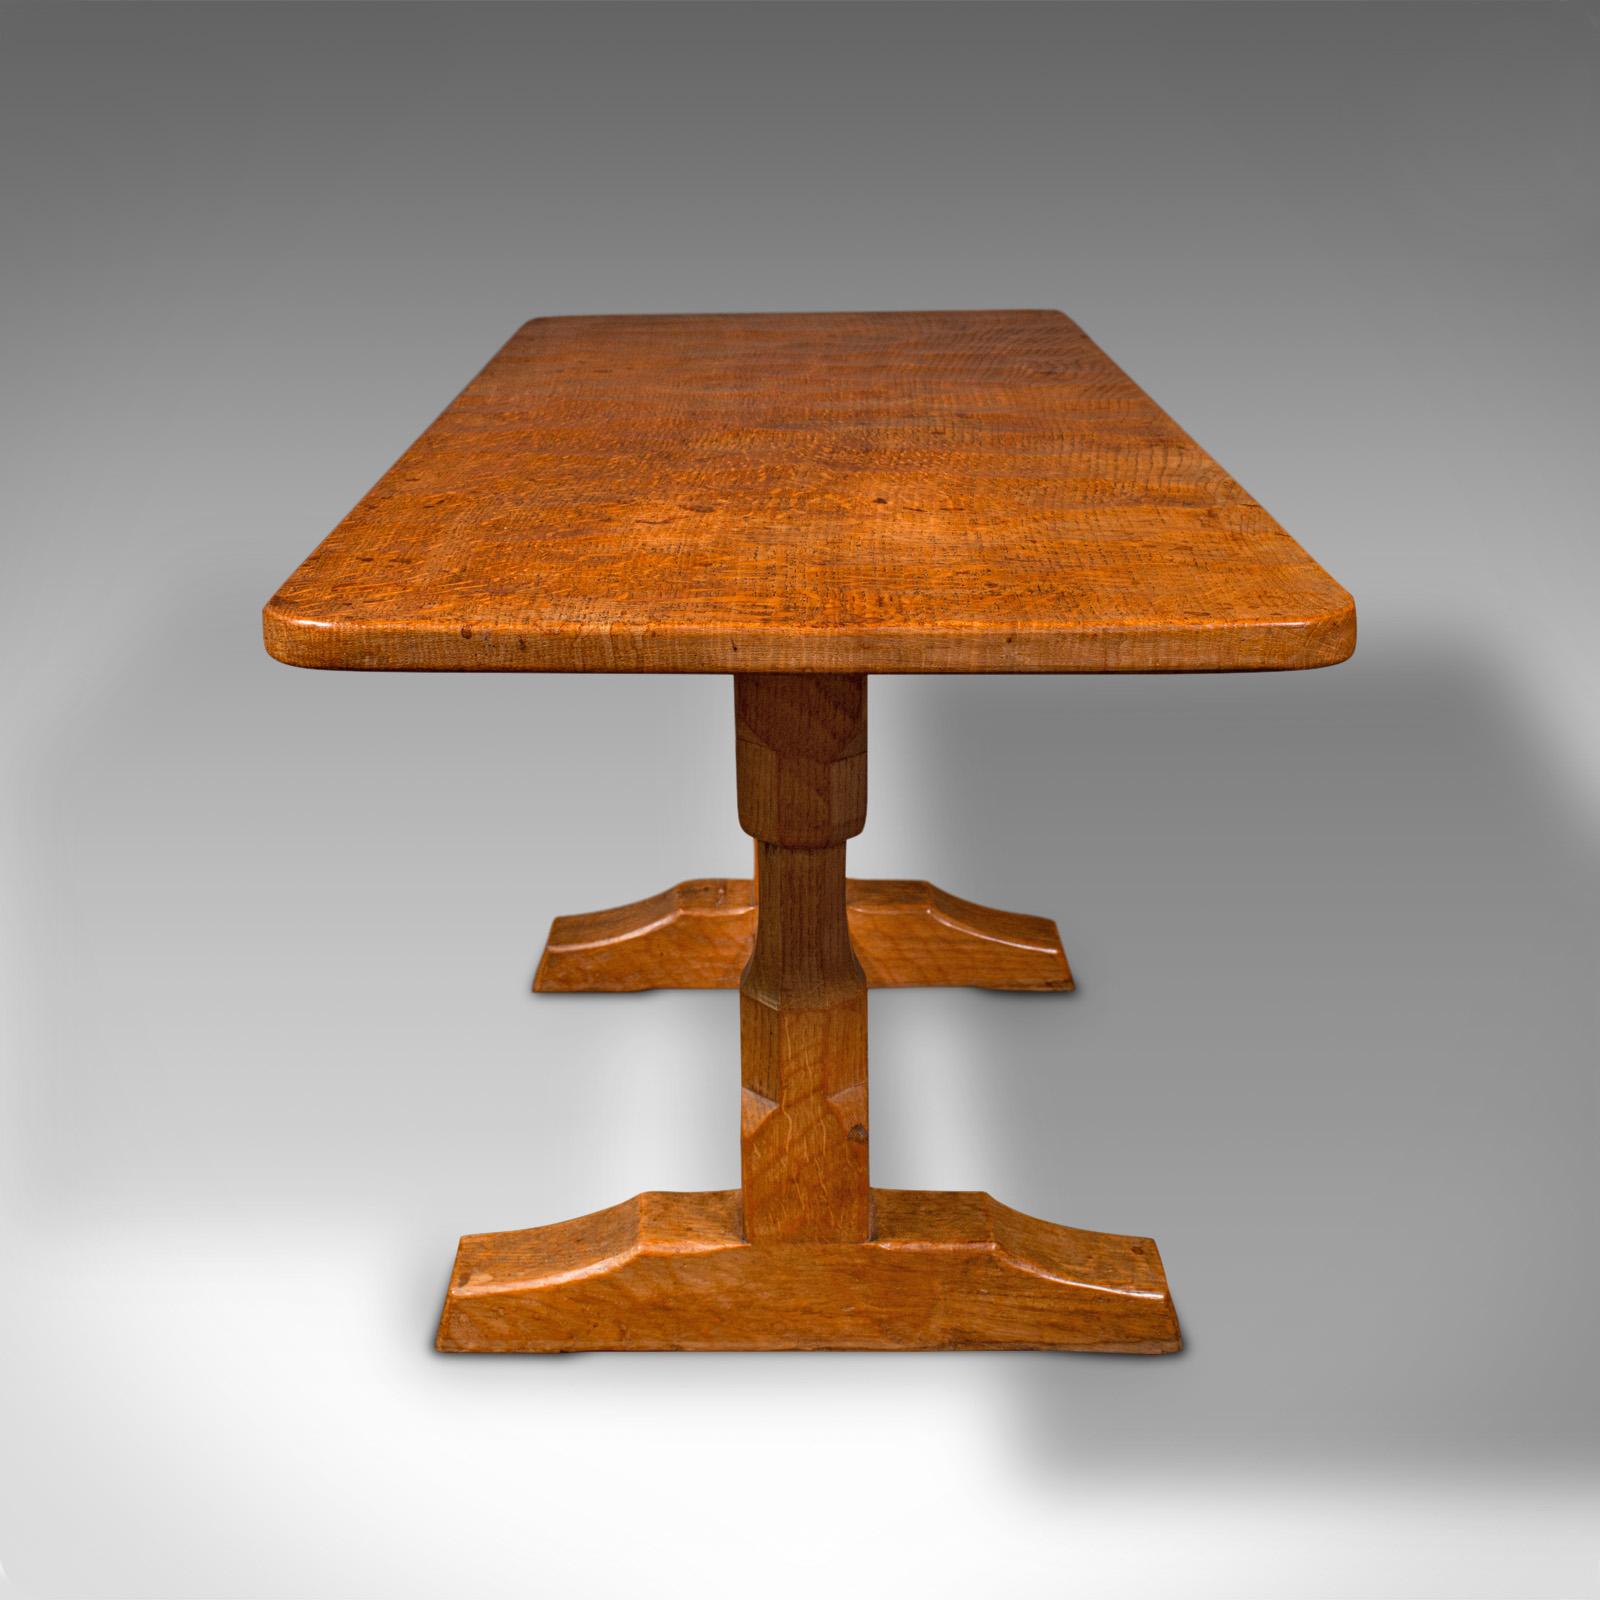 British Vintage Coffee Table, English Oak, Cotswold School, After Mouseman, 20th Century For Sale